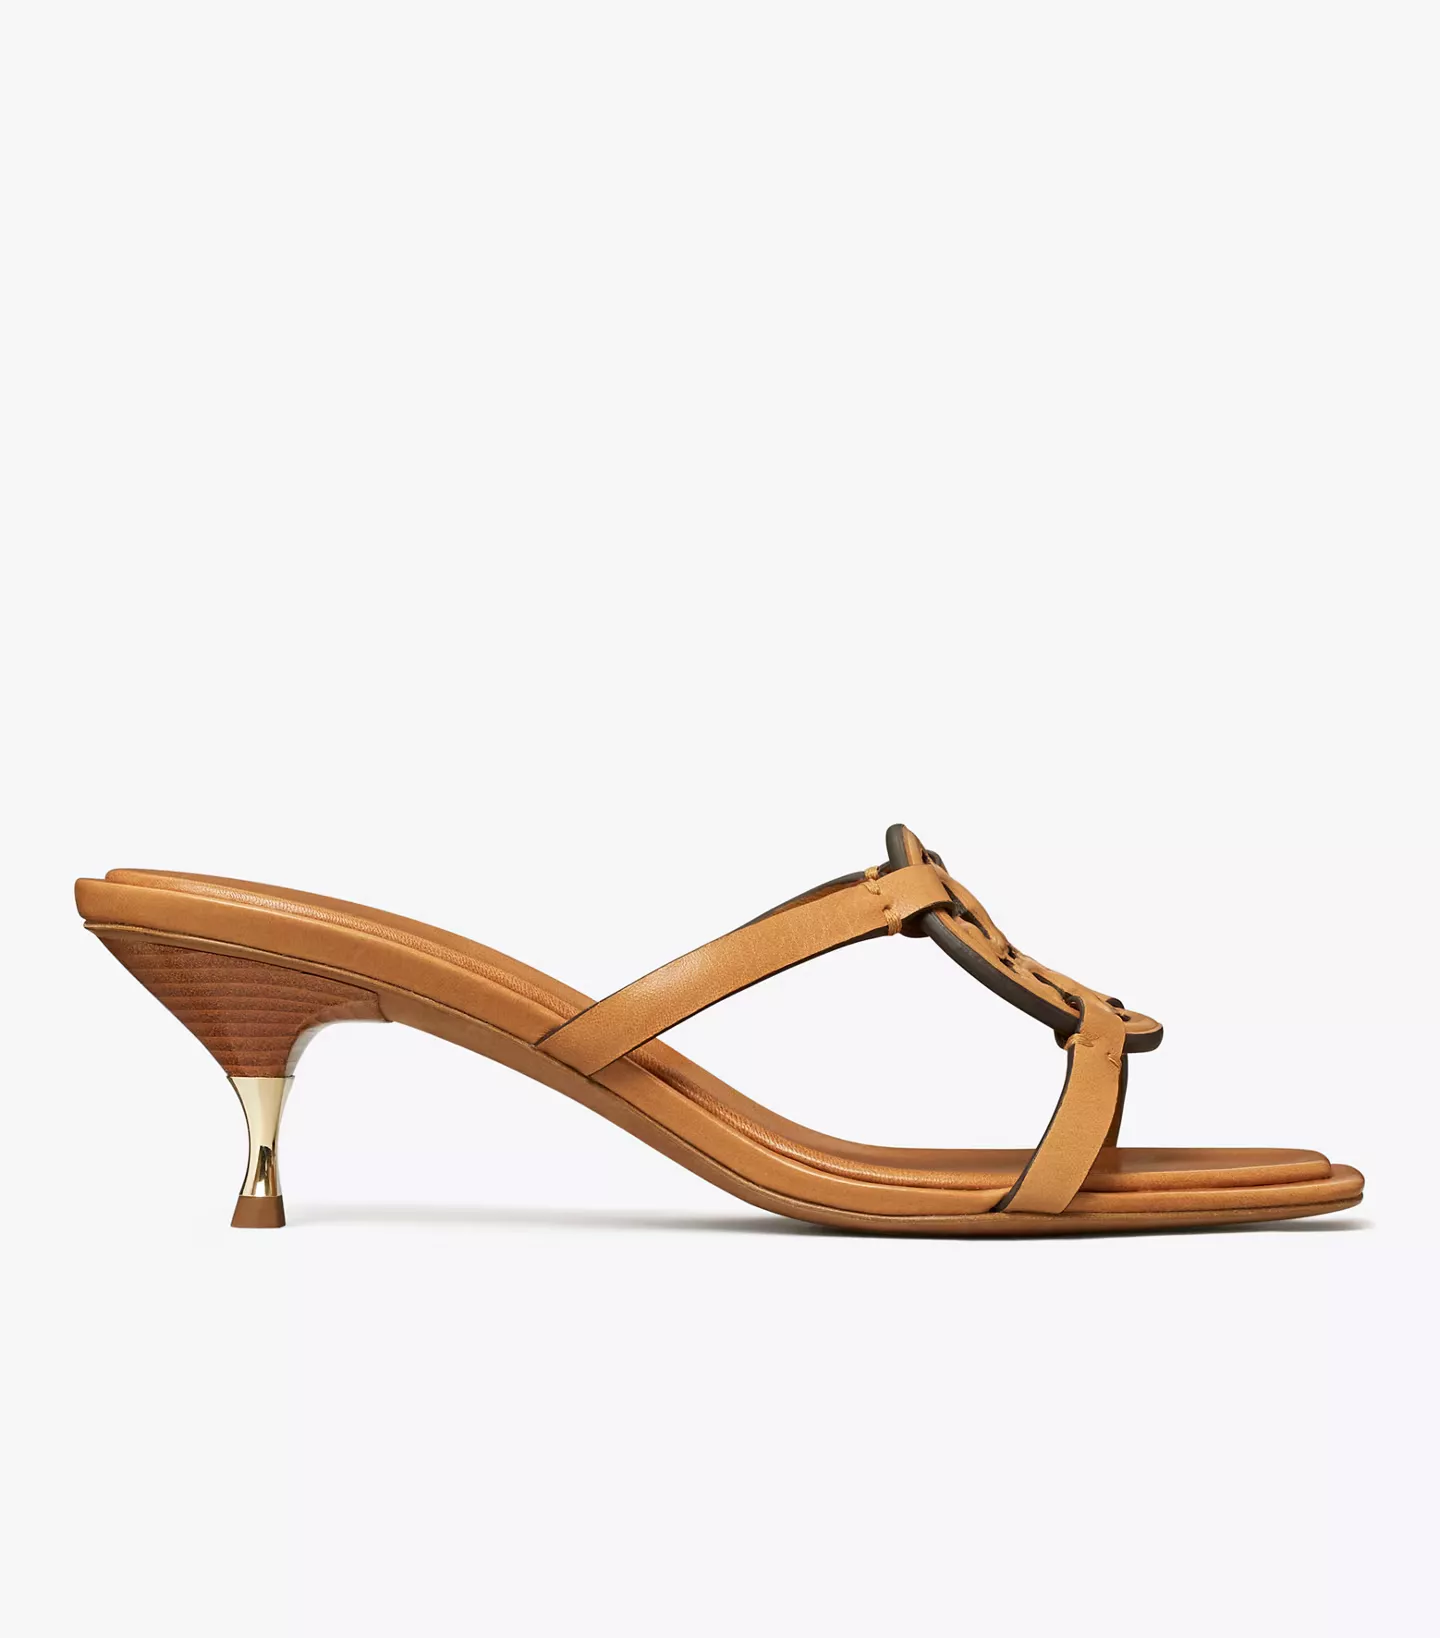 MILLER PATENT LEATHER SANDAL curated on LTK